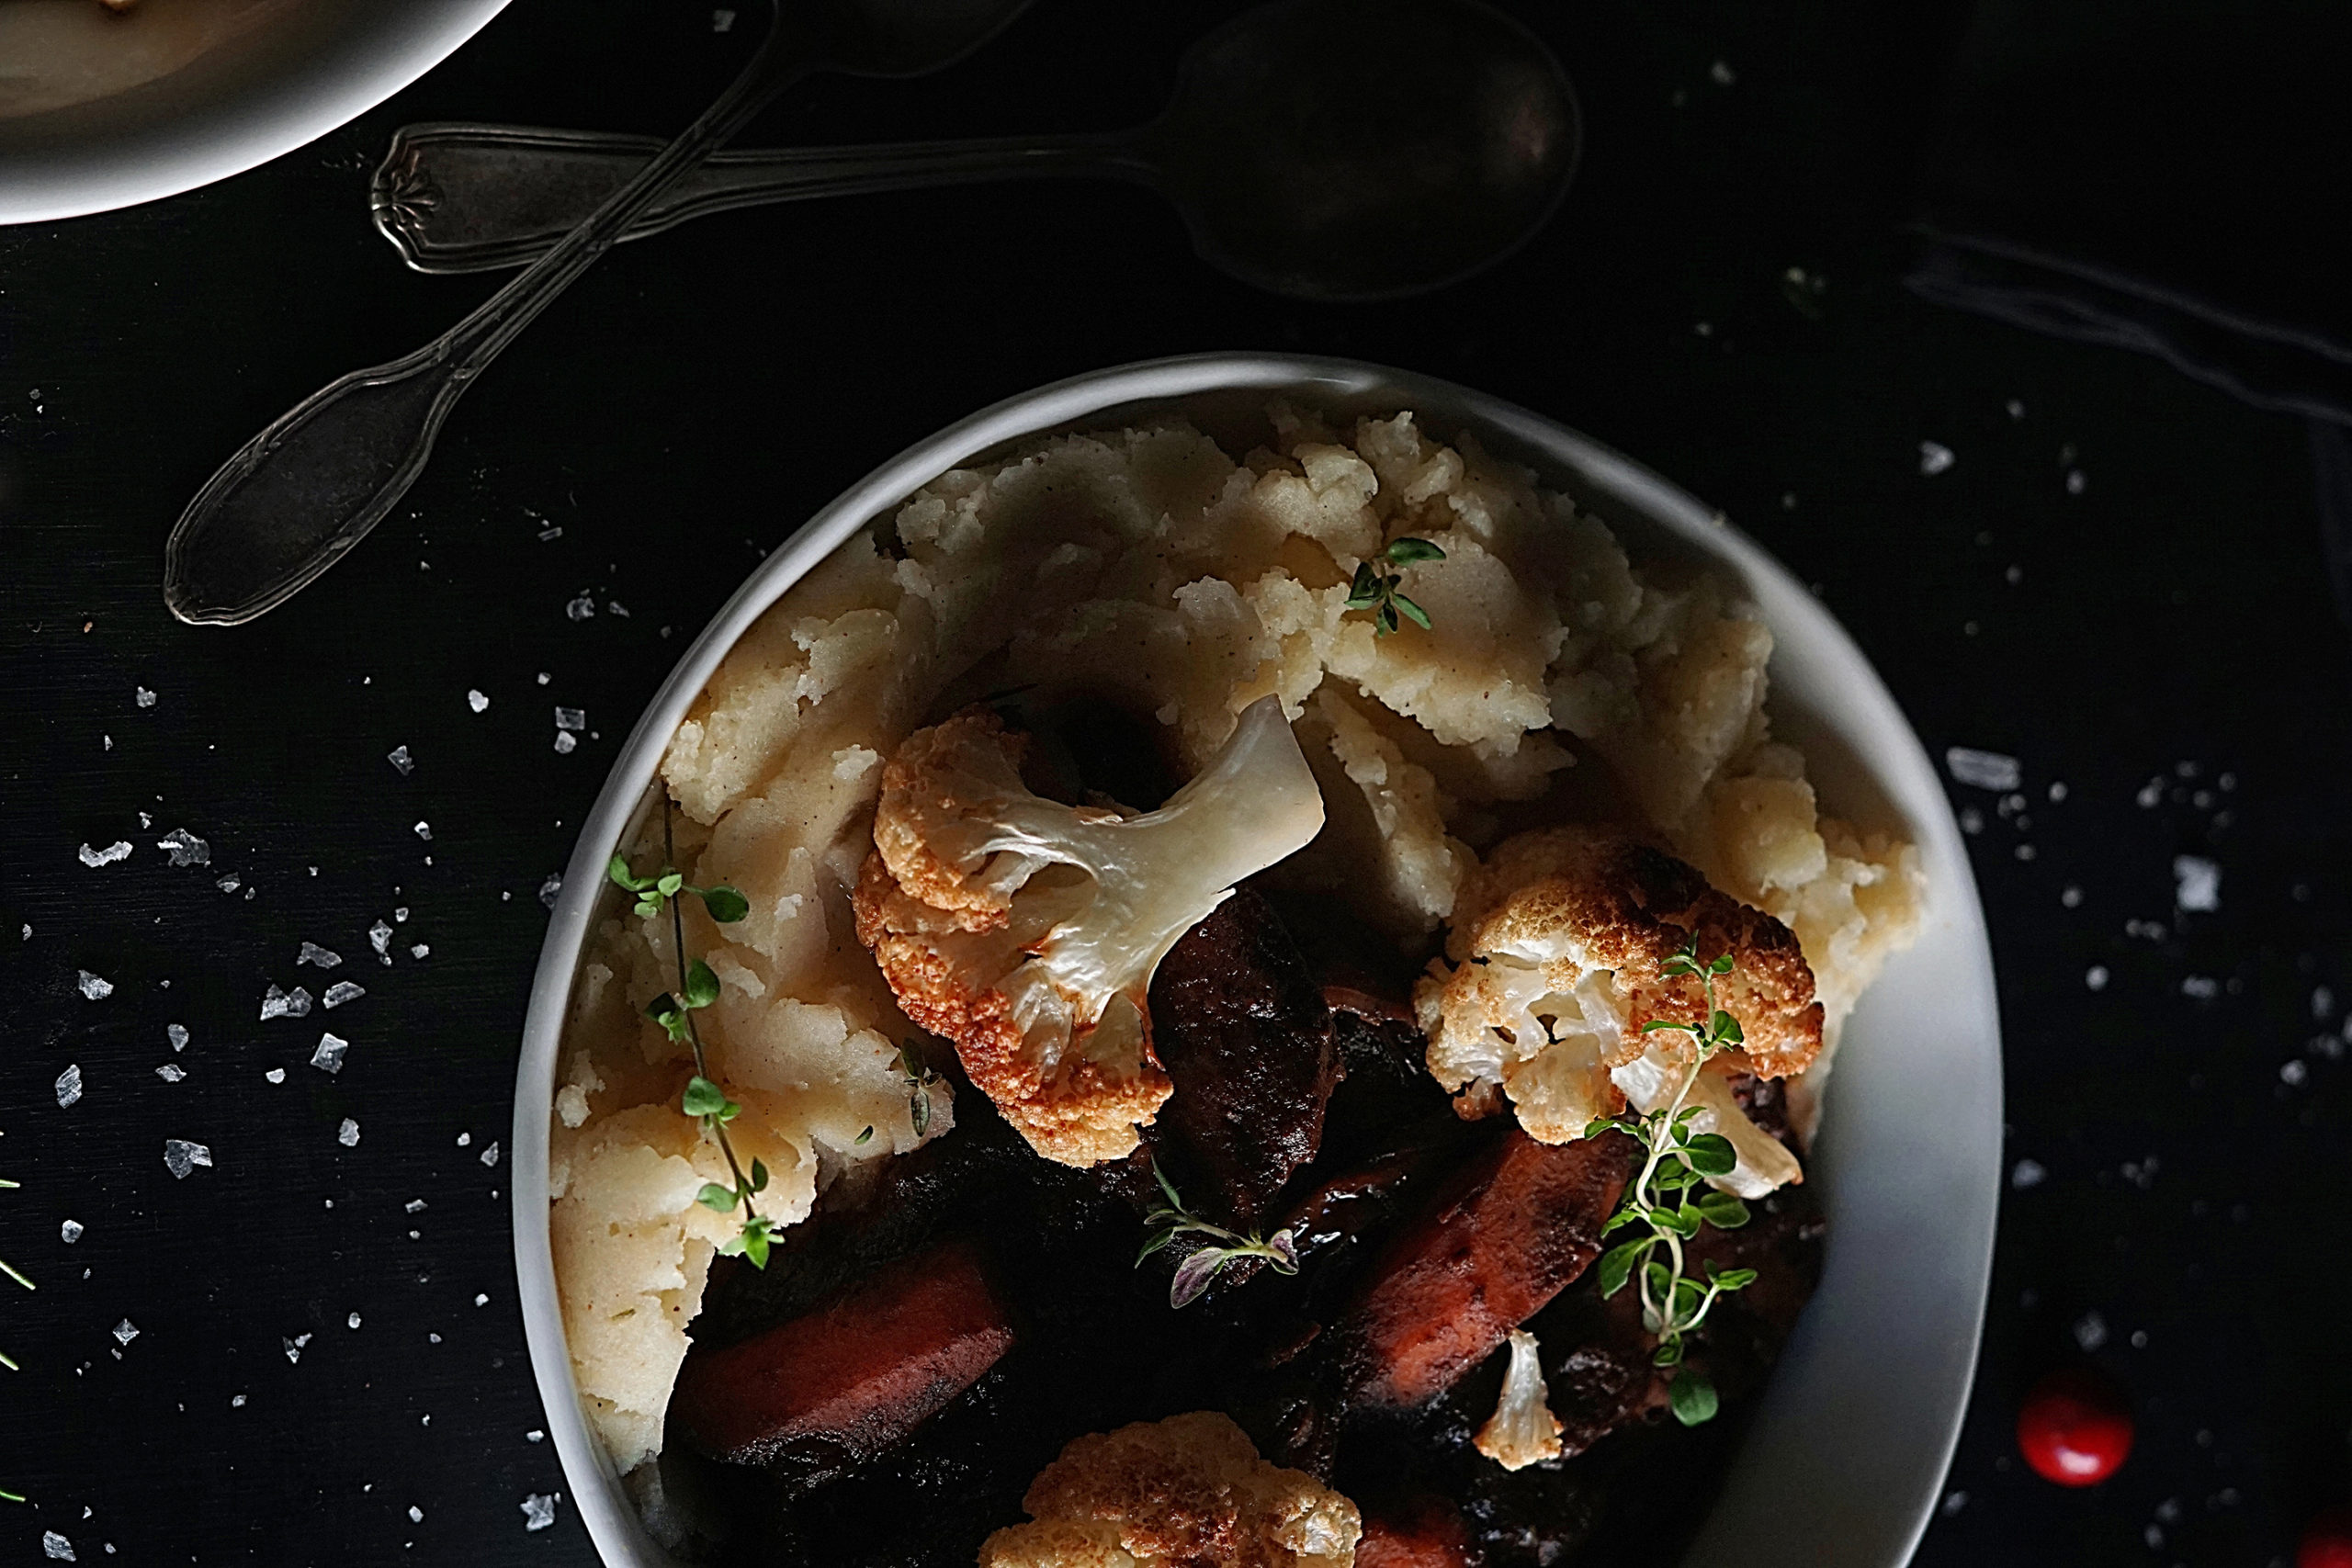 Heura® with cauliflower, mashed potatoes, and red wine